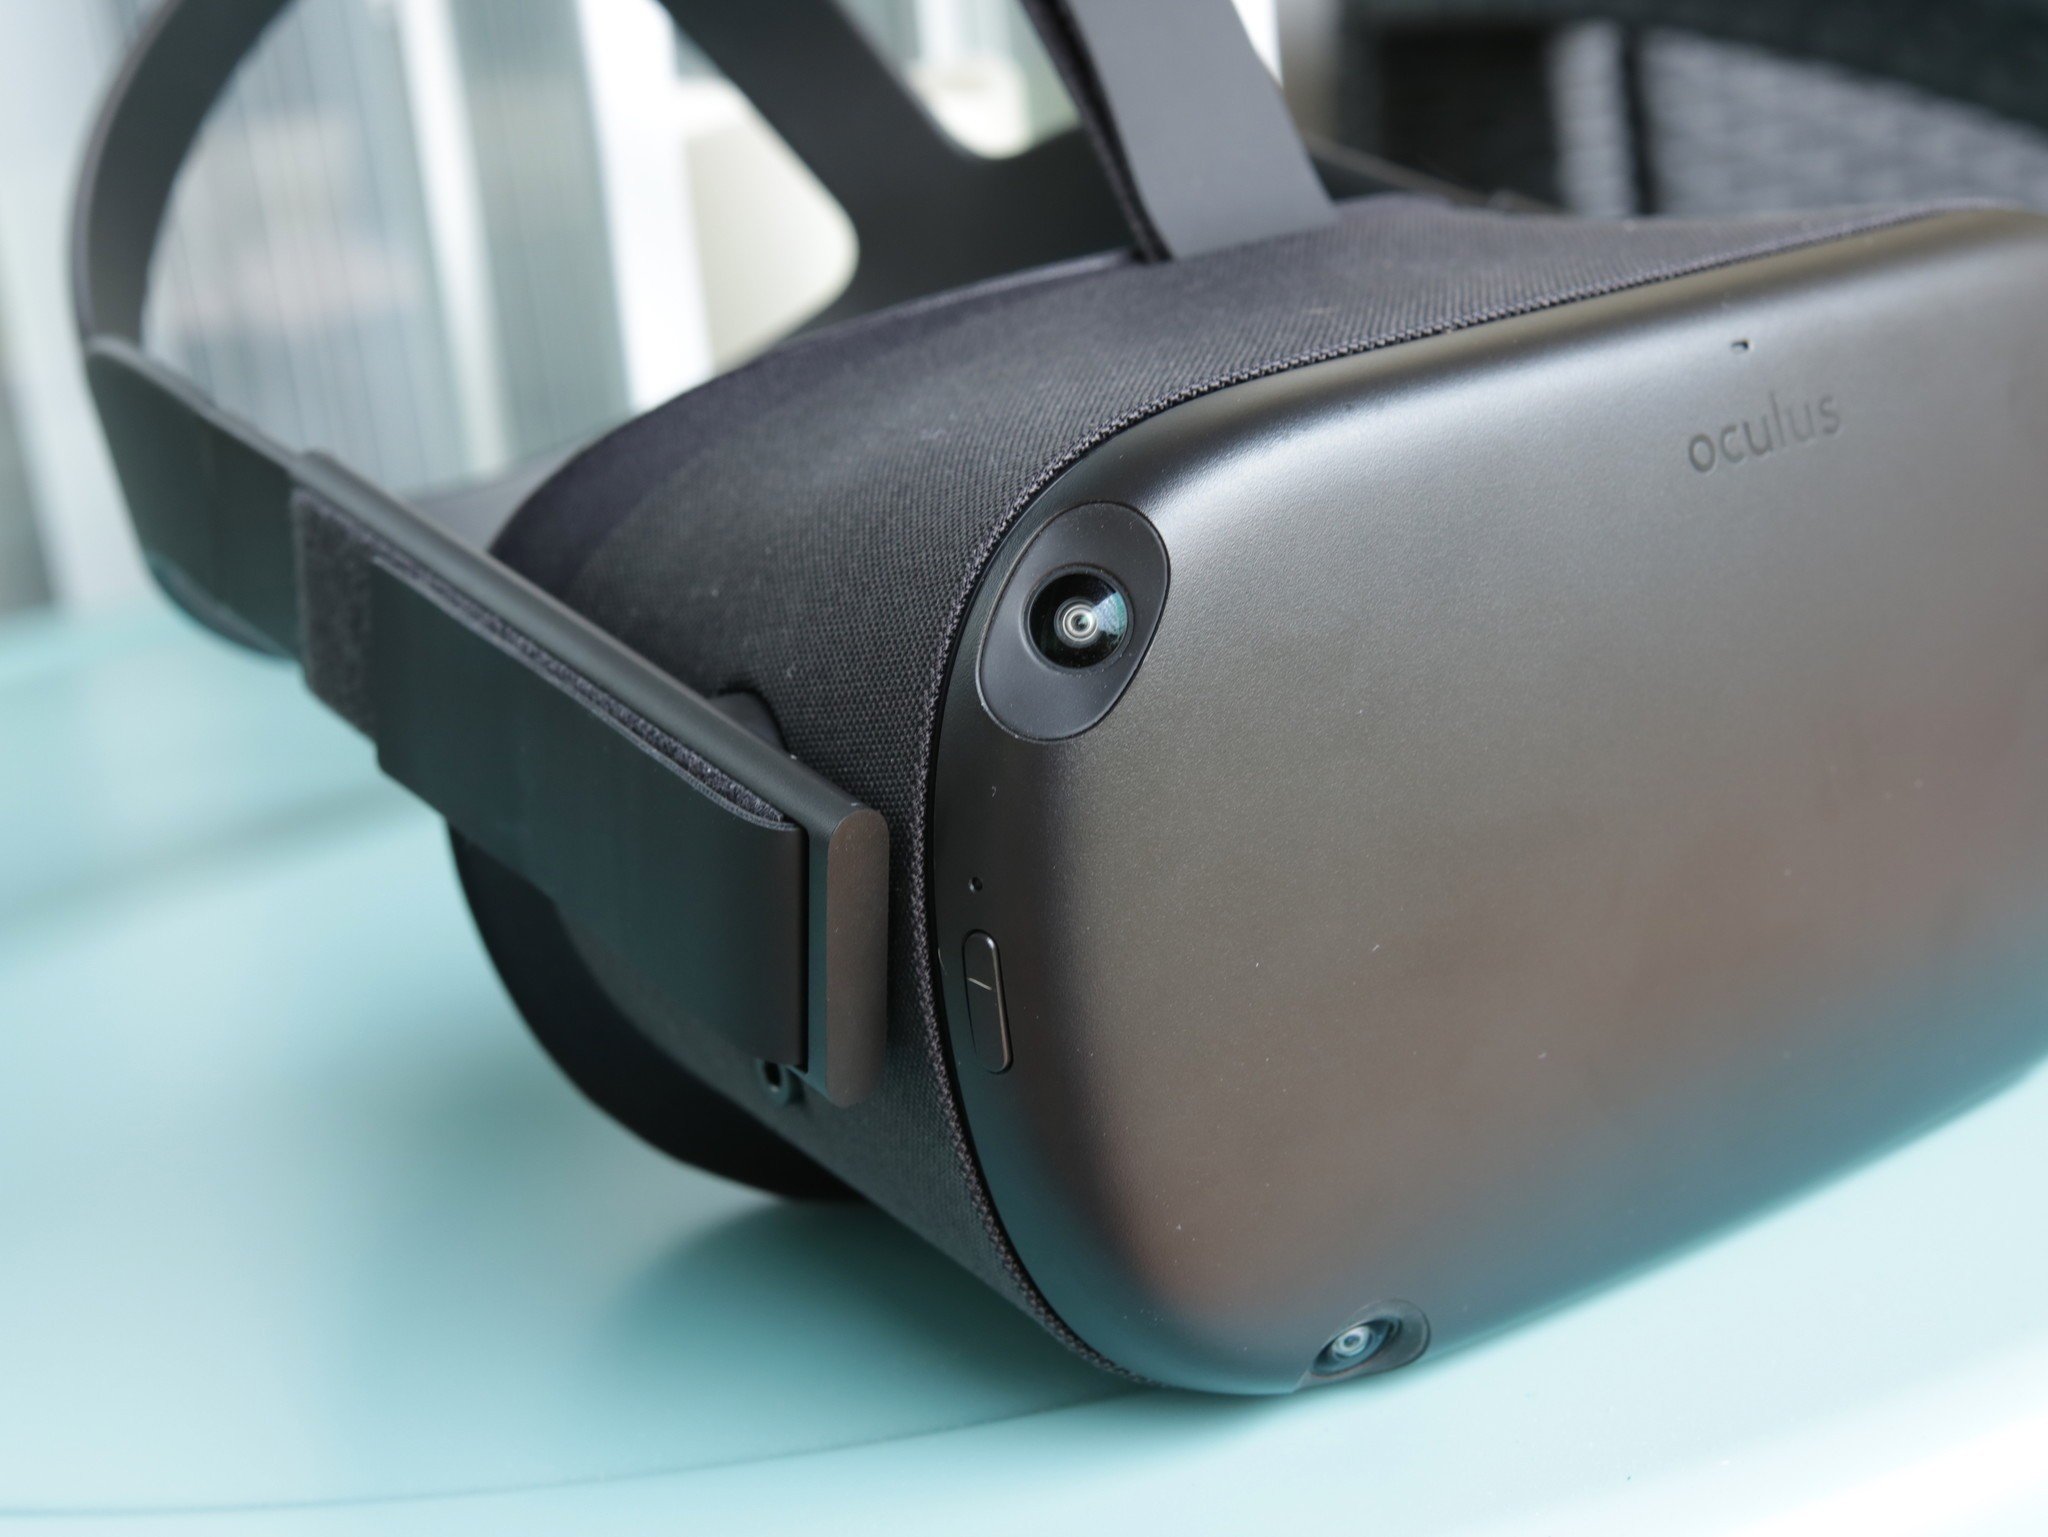 Which Oculus Quest games can I play while seated? | Android